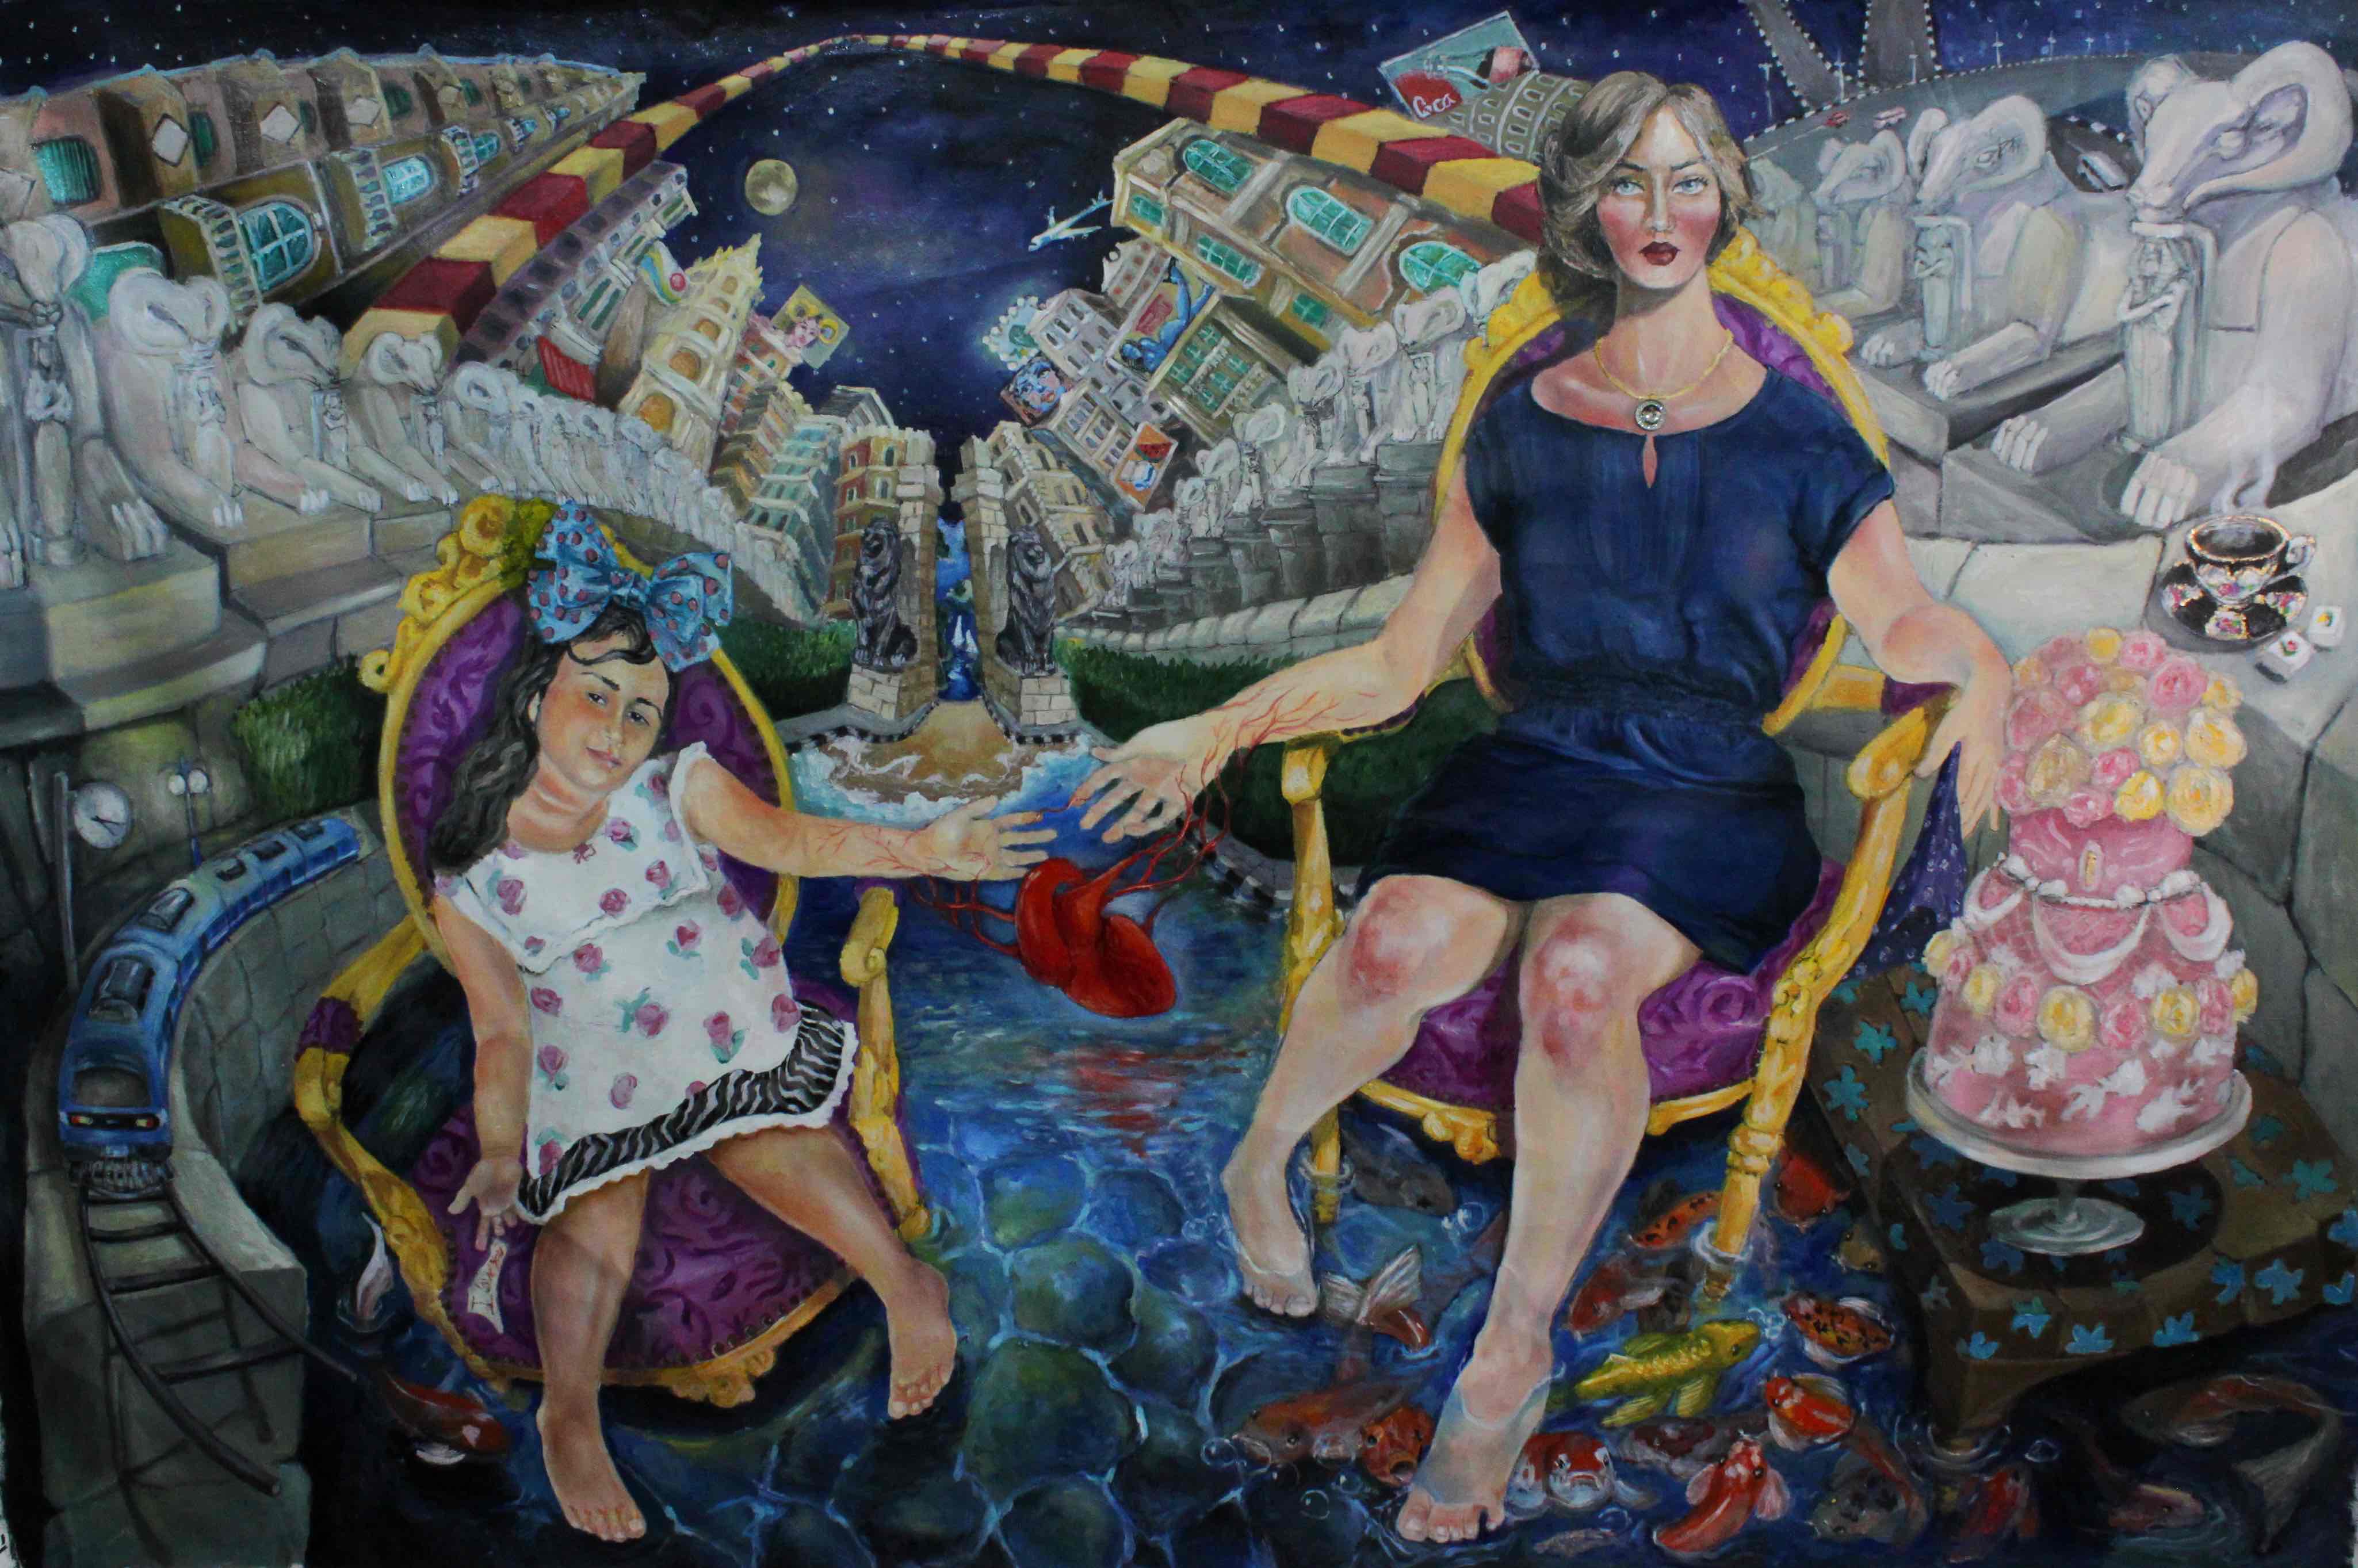 There Is A Place Like No Place On Earth, 2014, oil on canvas, 140 x 213 cm